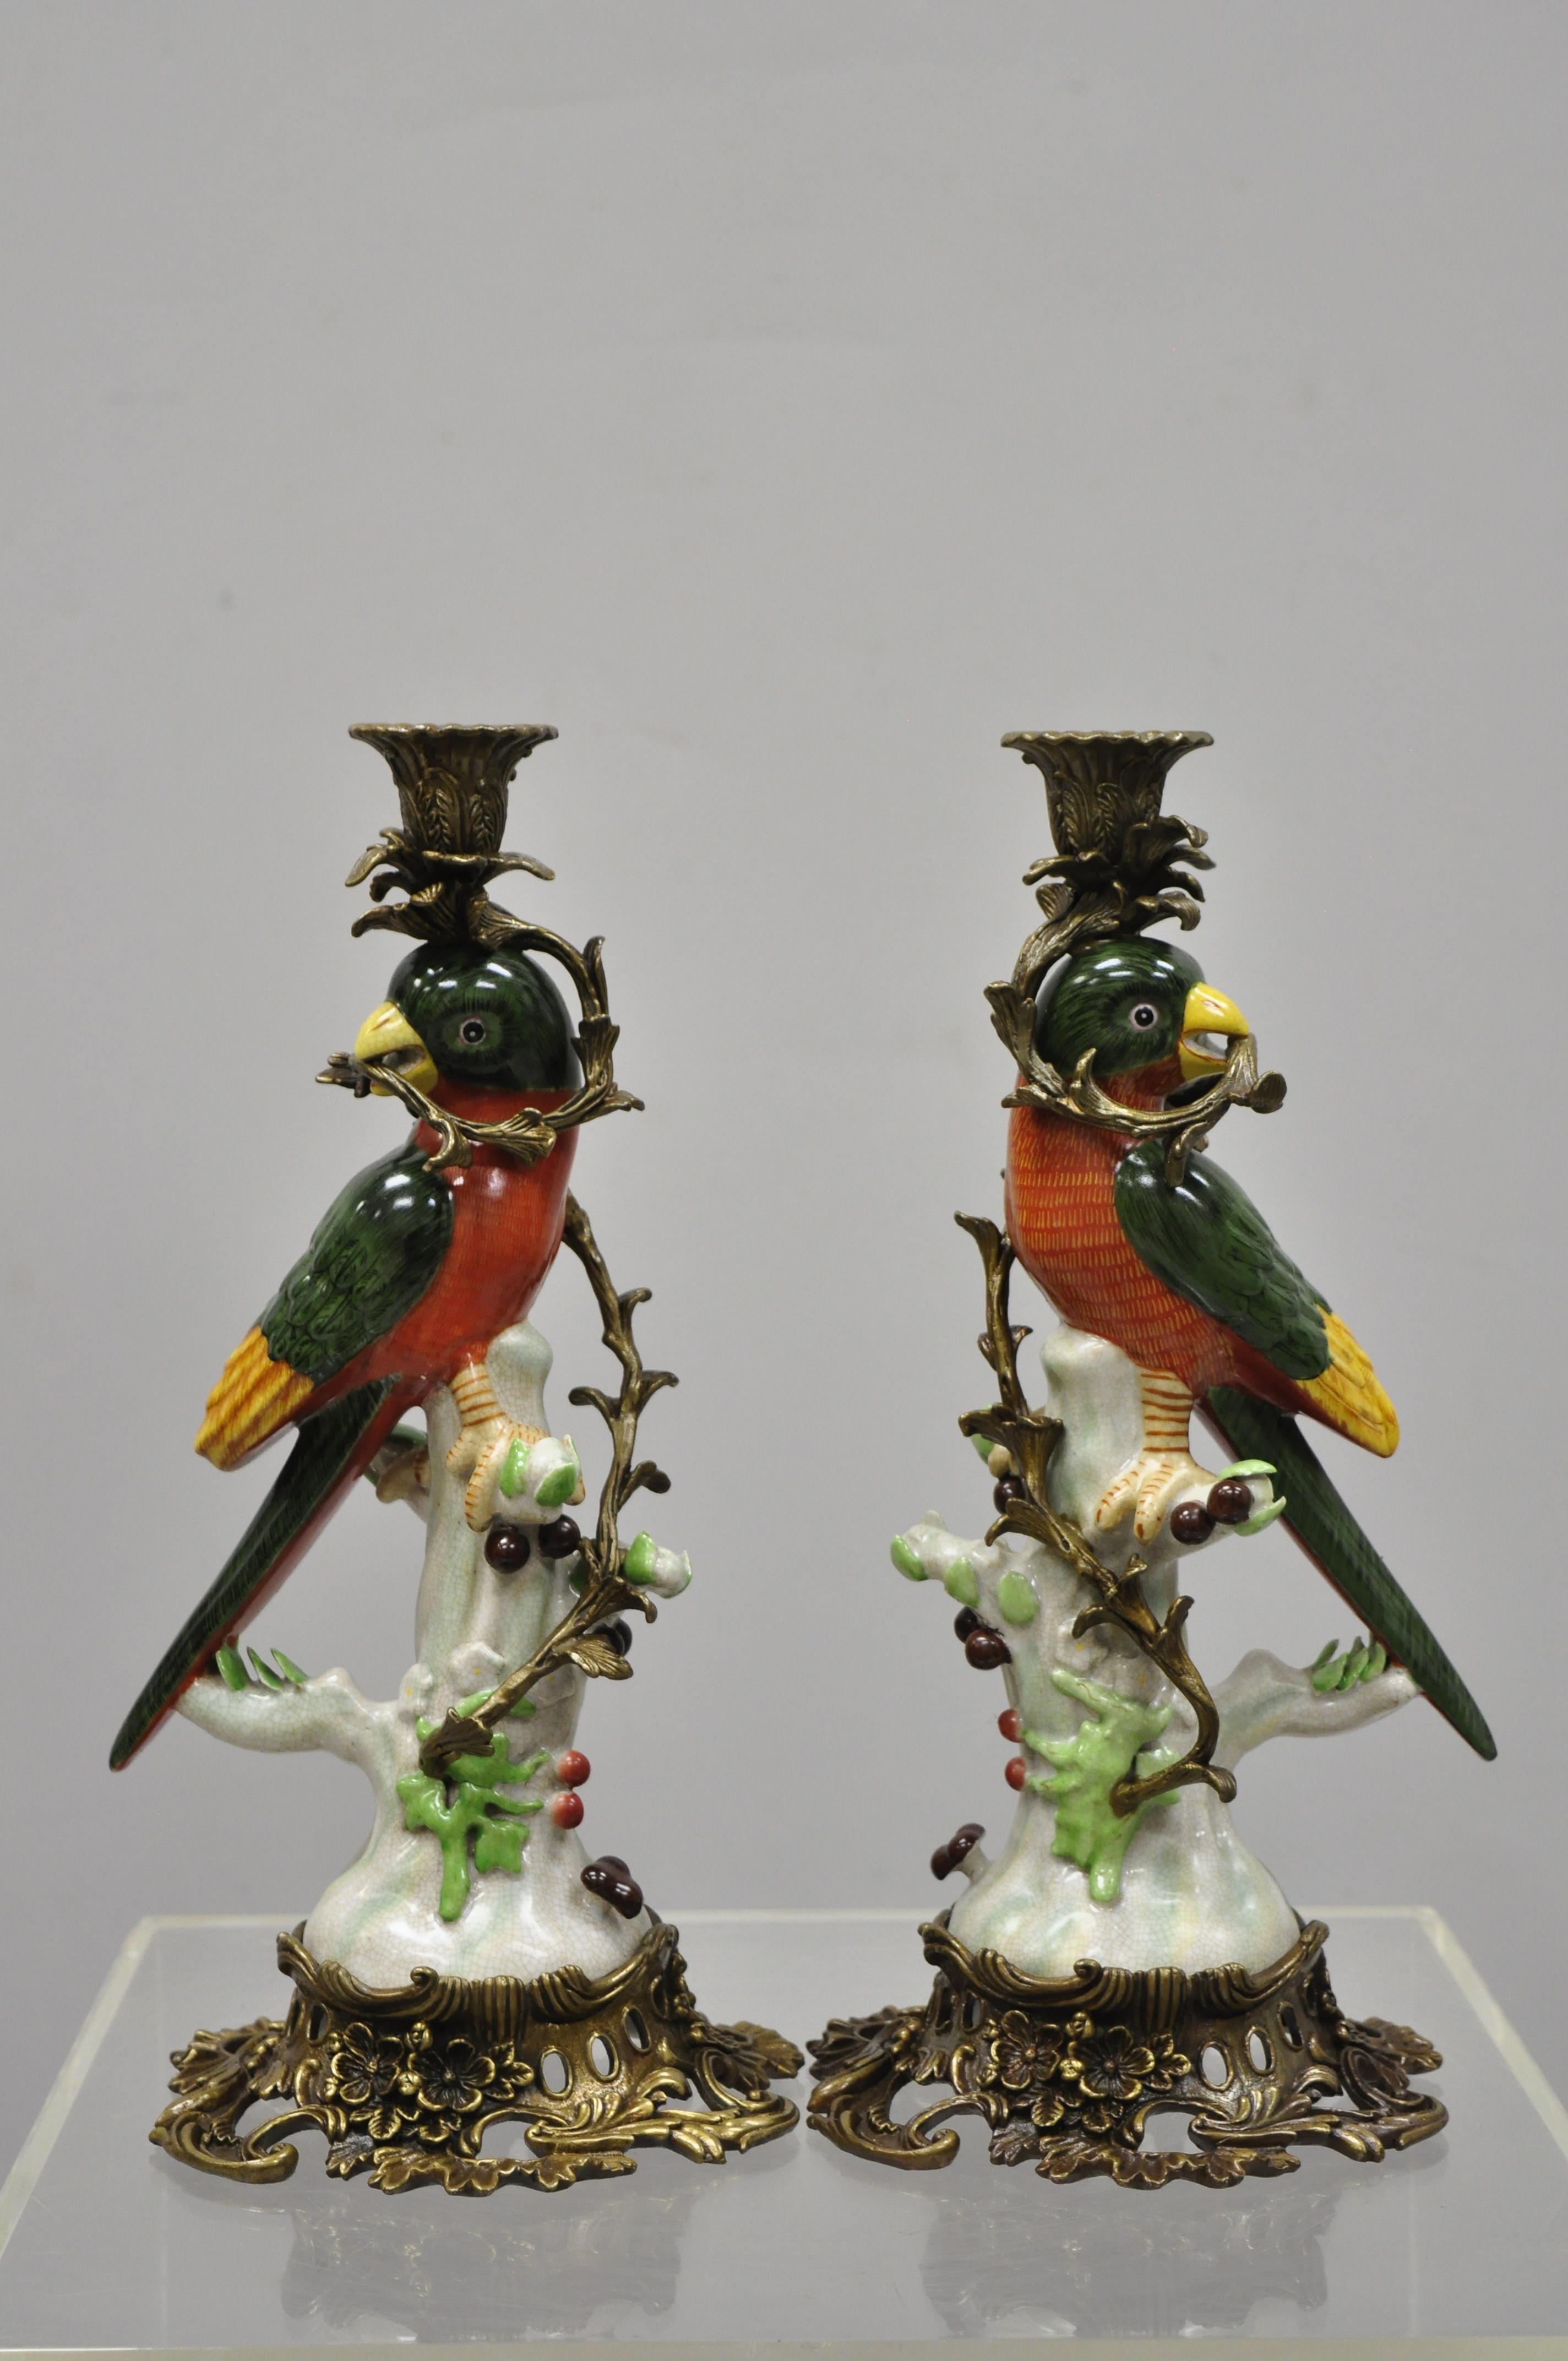 Pair of porcelain and bronze French style green and yellow parrot candlestick candleholders. Listing includes ornate brass base and ormolu, porcelain parrot figure, right and left form, circa late 20th century. Measurements: 14.5